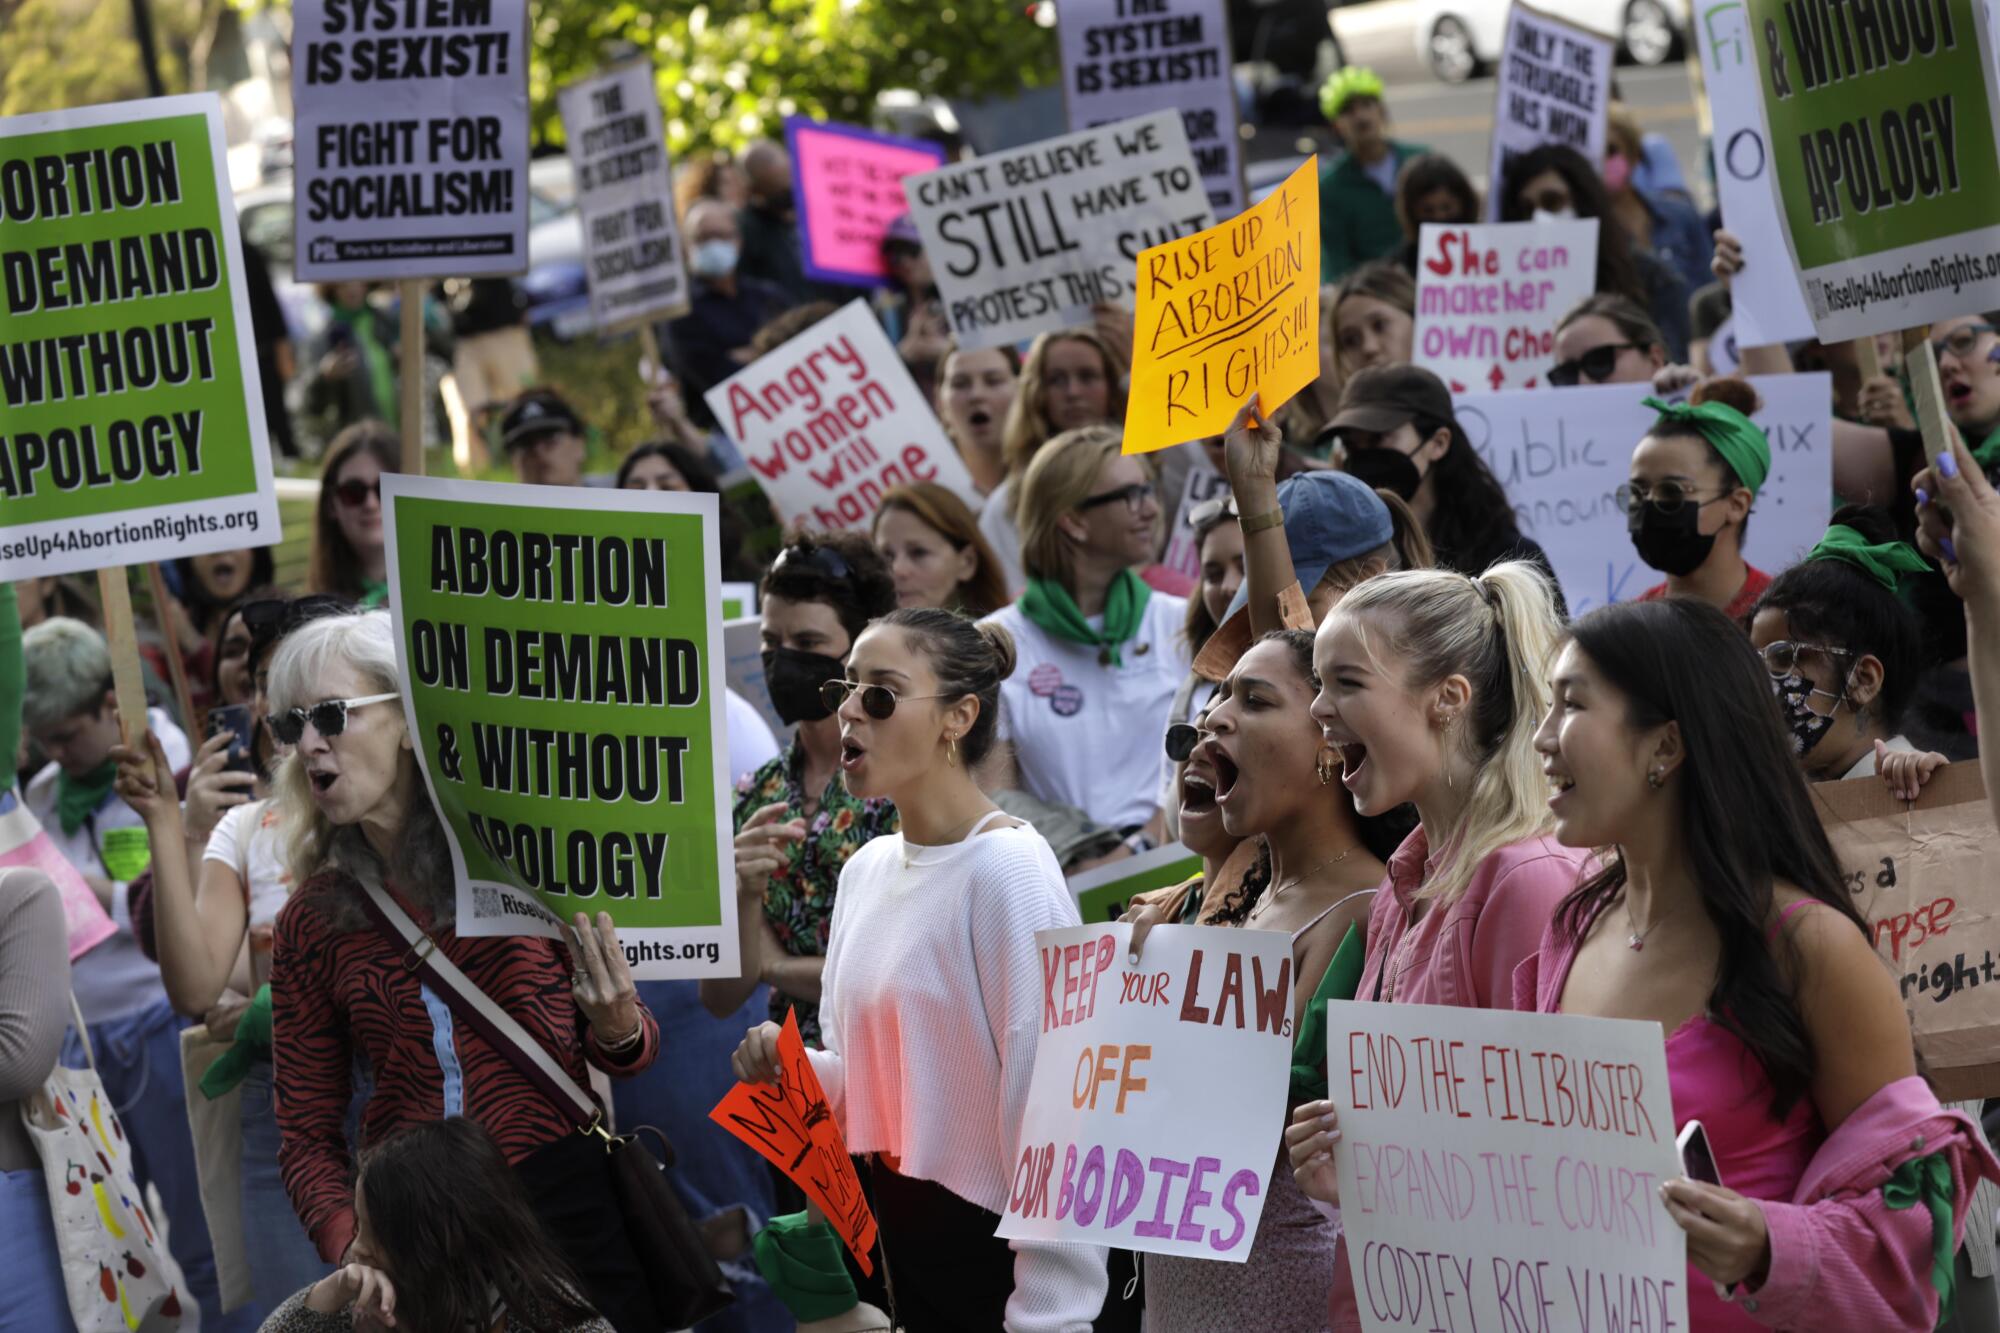 People hold signs in support of abortion rights and expansion of the Supreme Court